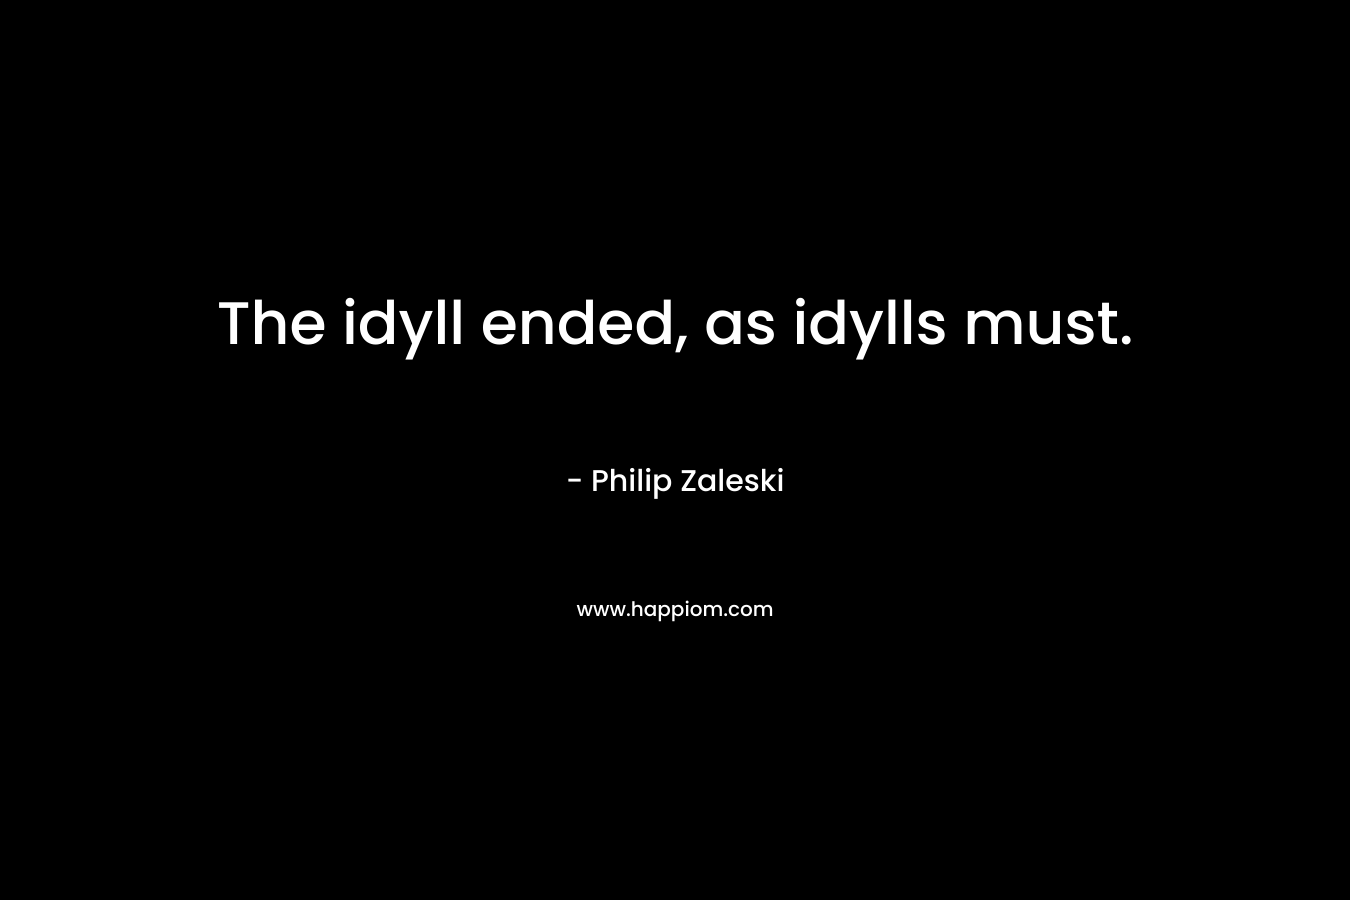 The idyll ended, as idylls must. – Philip Zaleski